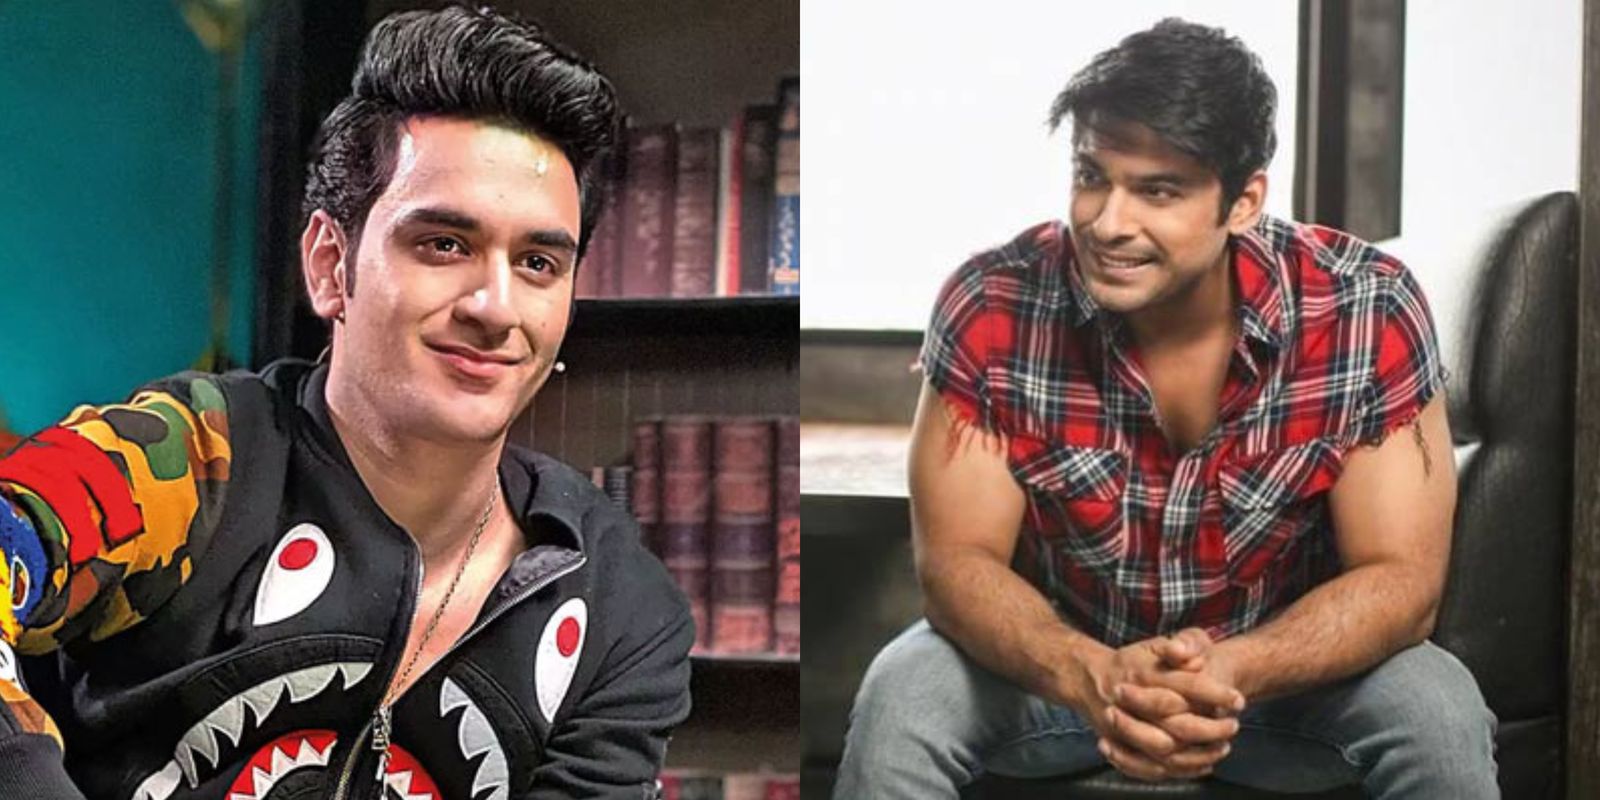 Bigg Boss 13 Winner Sidharth Shukla To Join Forces With Vikas Gupta For His Next Project?